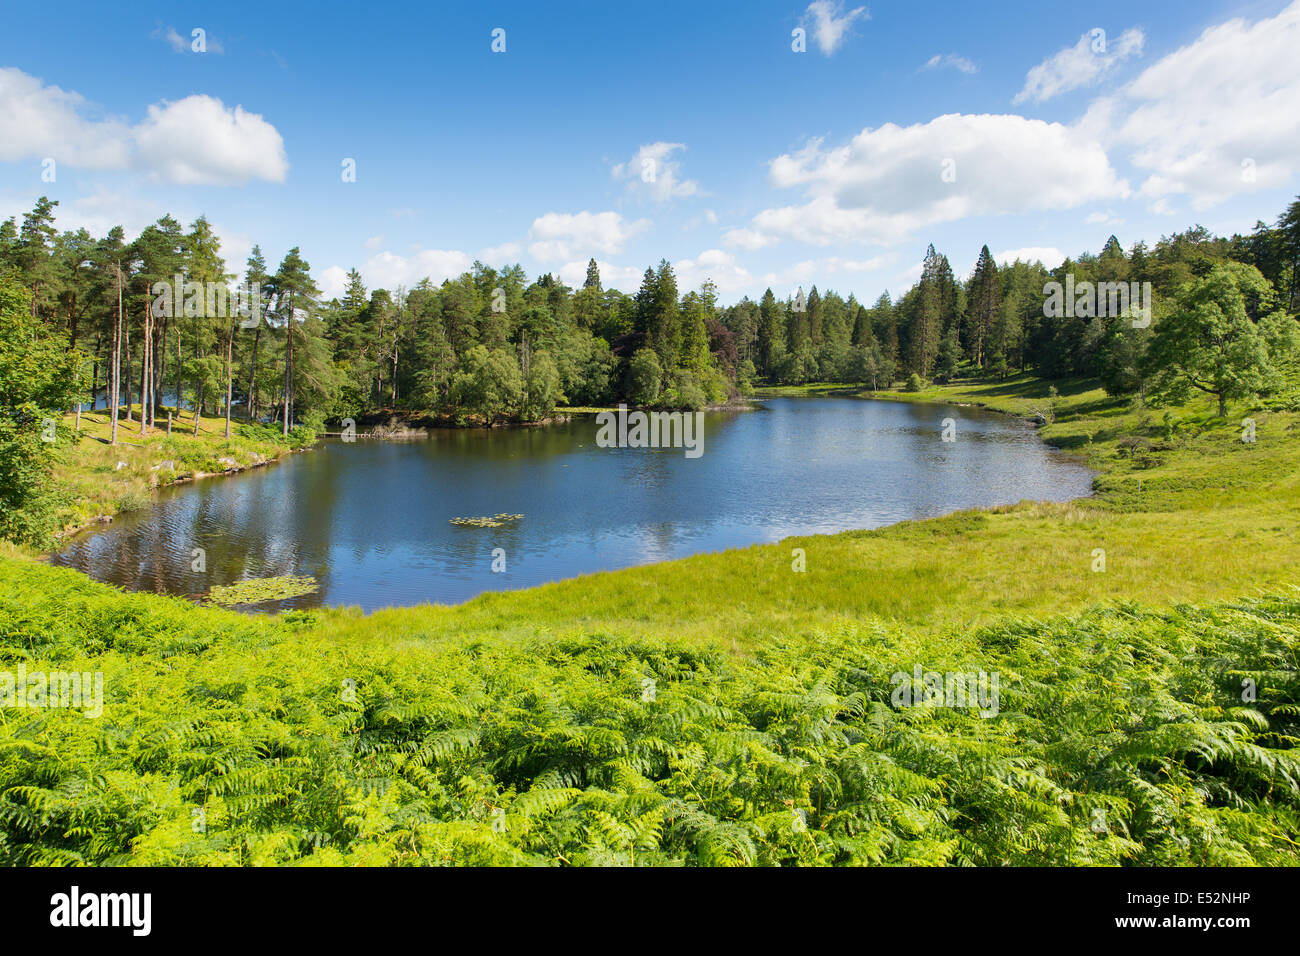 Beautiful lake surrounded by woodland and trees with blue sky and clouds Stock Photo